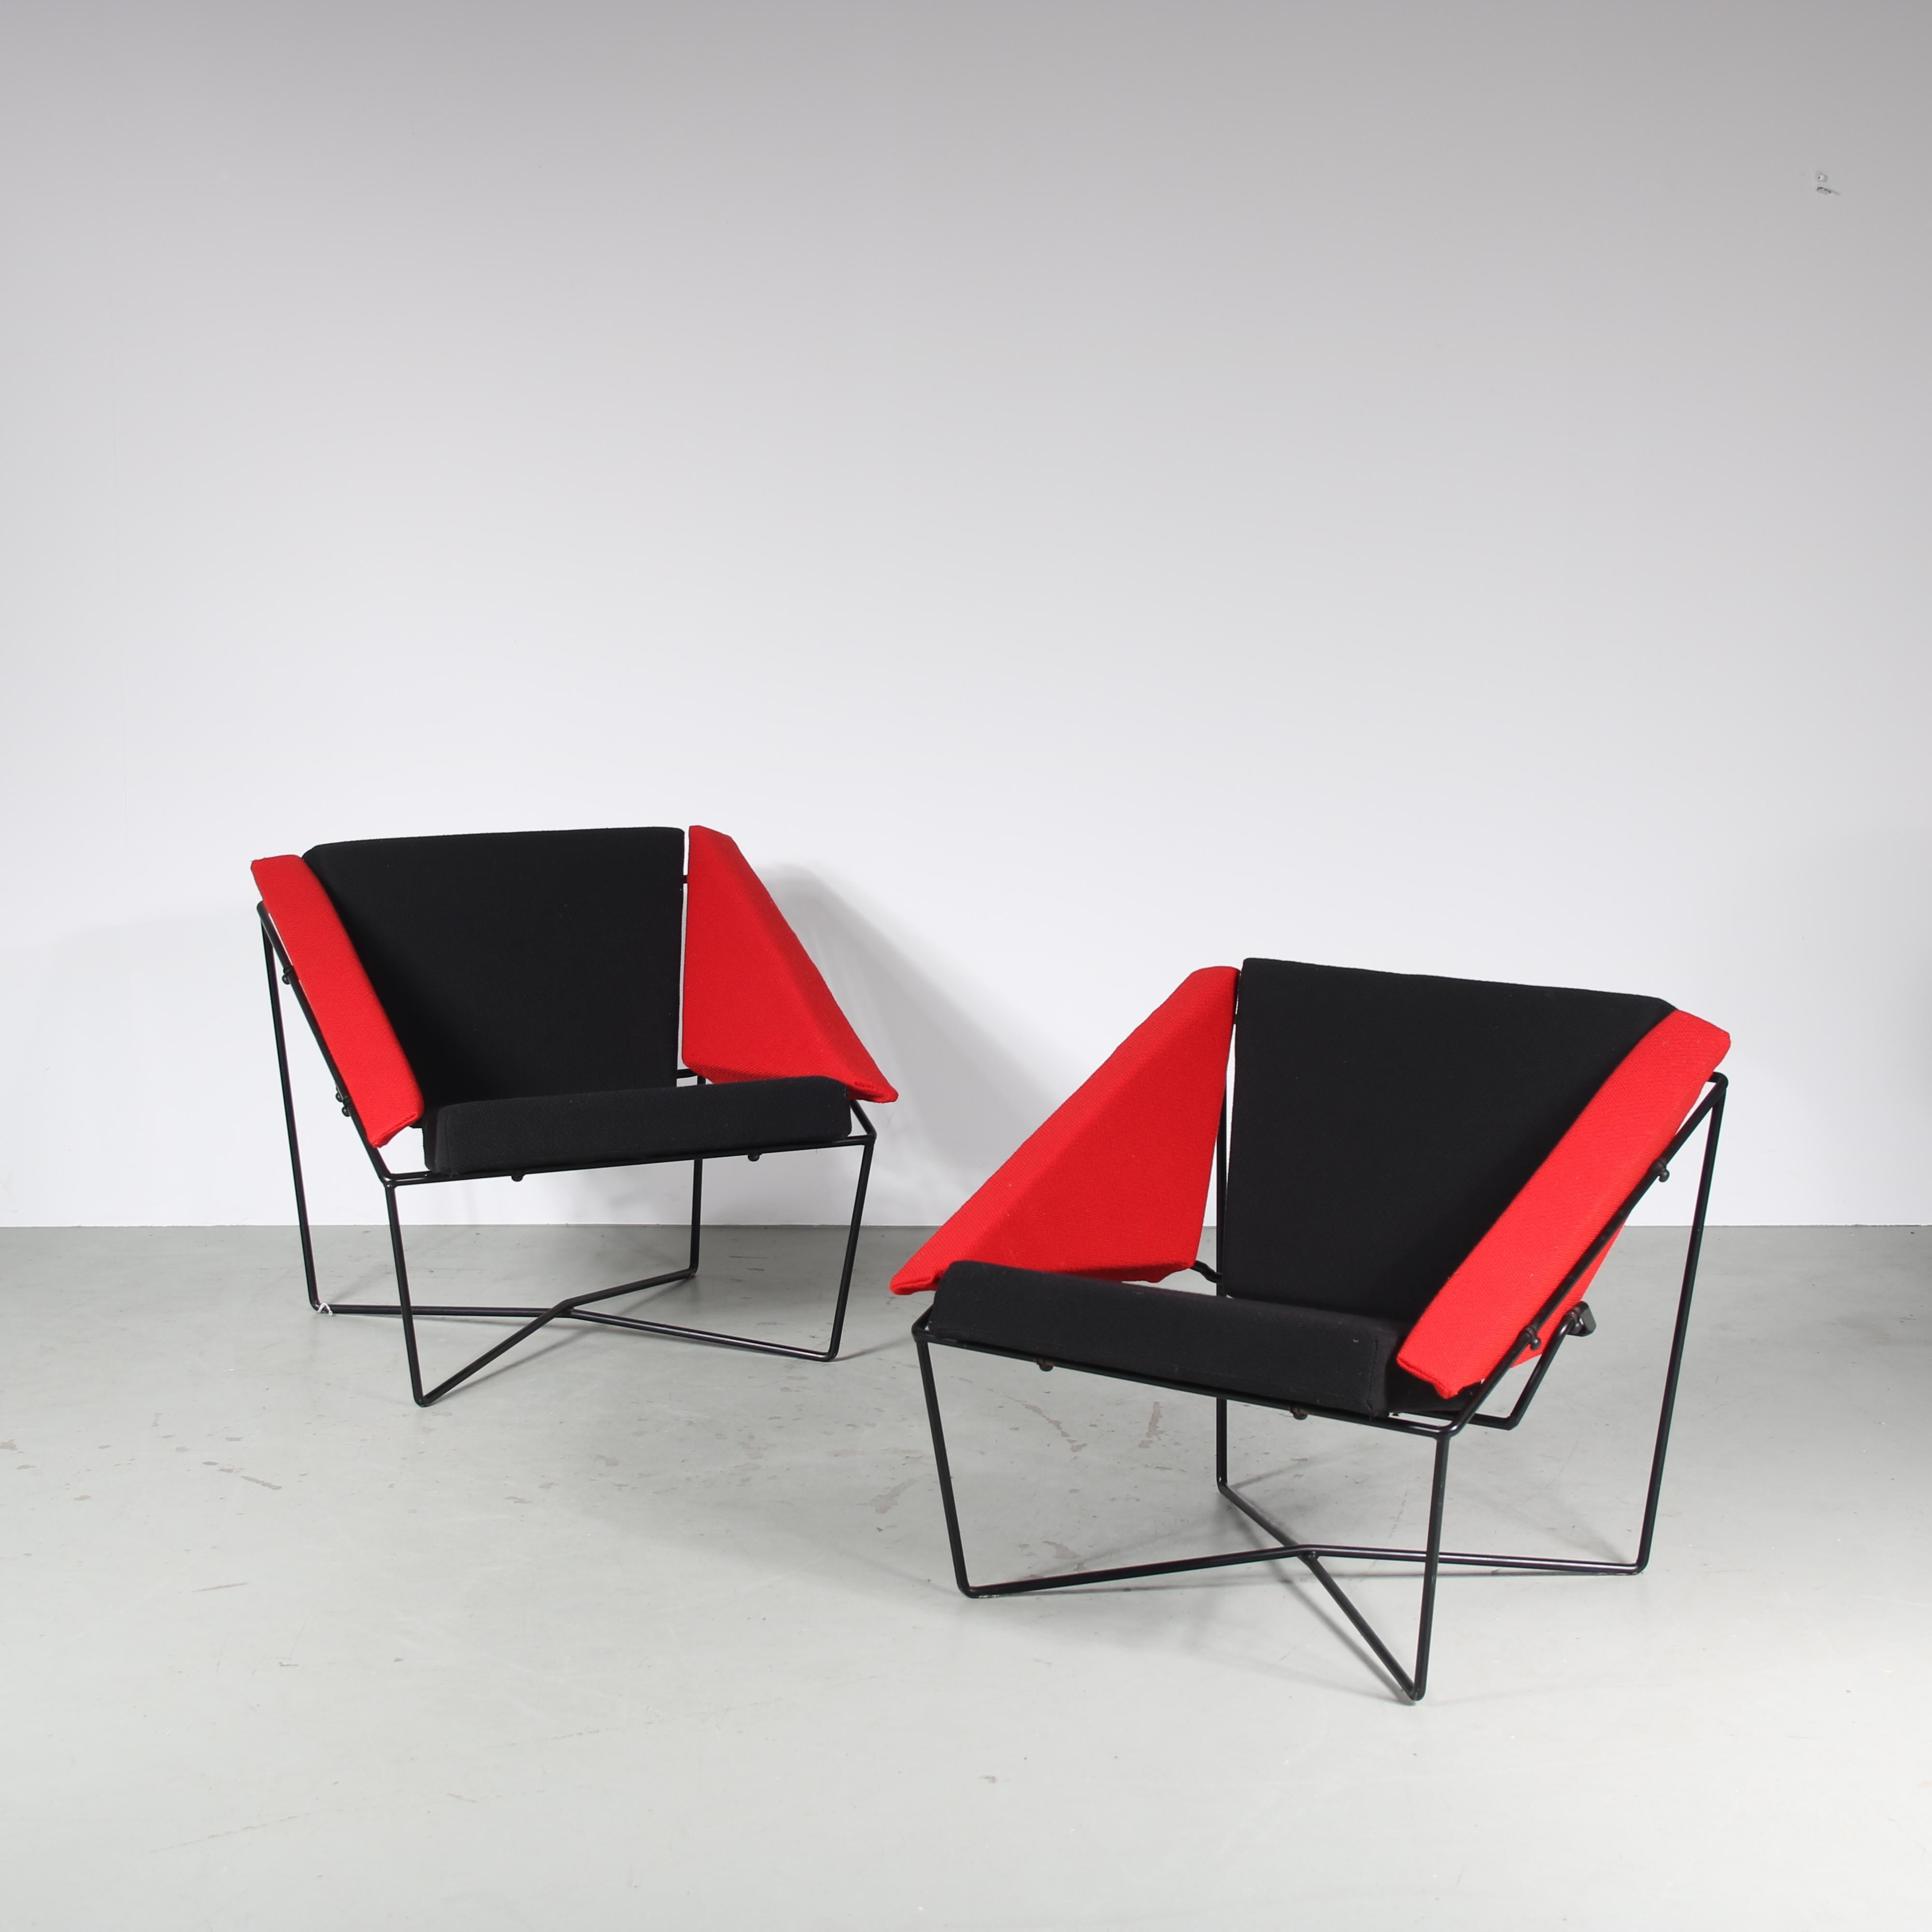 A lovely set of two lounge chairs, model “Van Speyk”, designed by Rob Eckhardt and manufactured in very small amount by Pastoe in the Netherlands in 1984.

The chairs have black lacuqered tubular metal bases in nice geometric shapes. These shapes